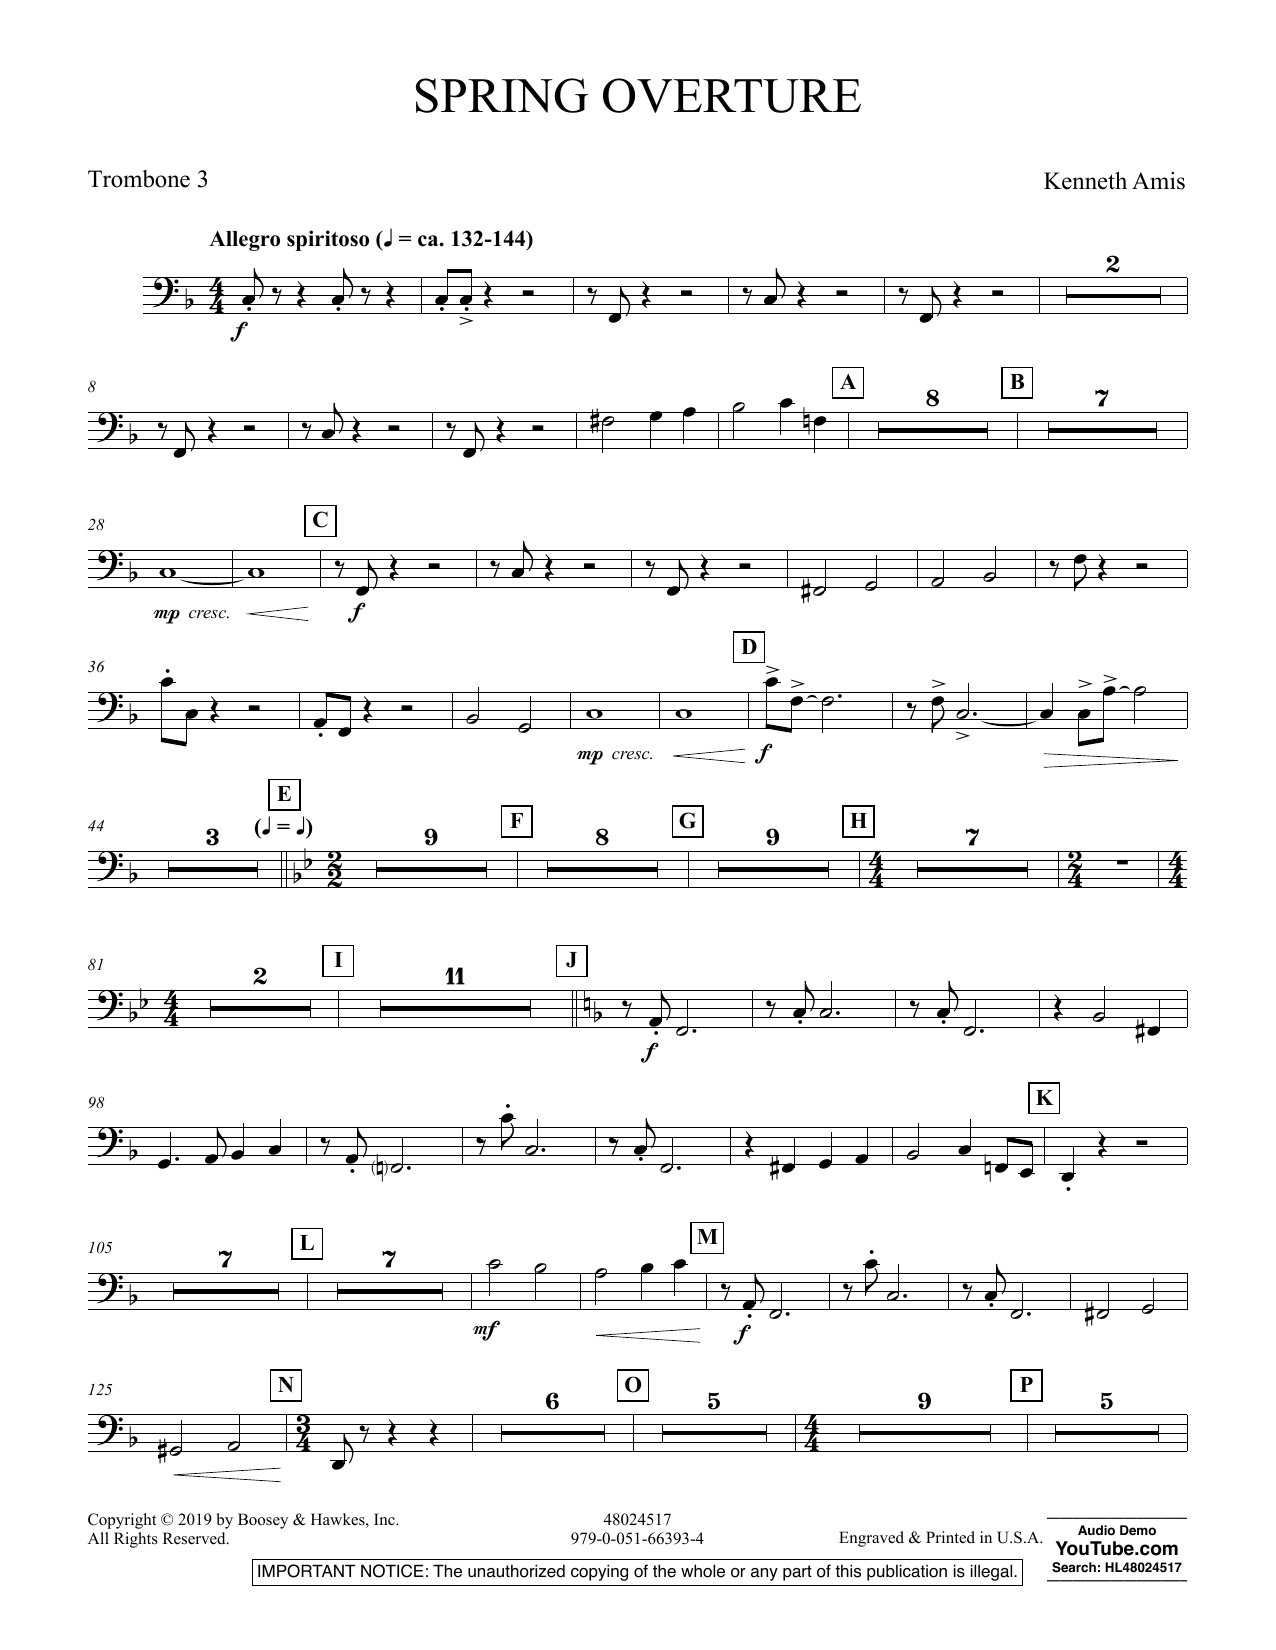 Kenneth Amis Spring Overture - Trombone 3 sheet music preview music notes and score for Concert Band including 2 page(s)